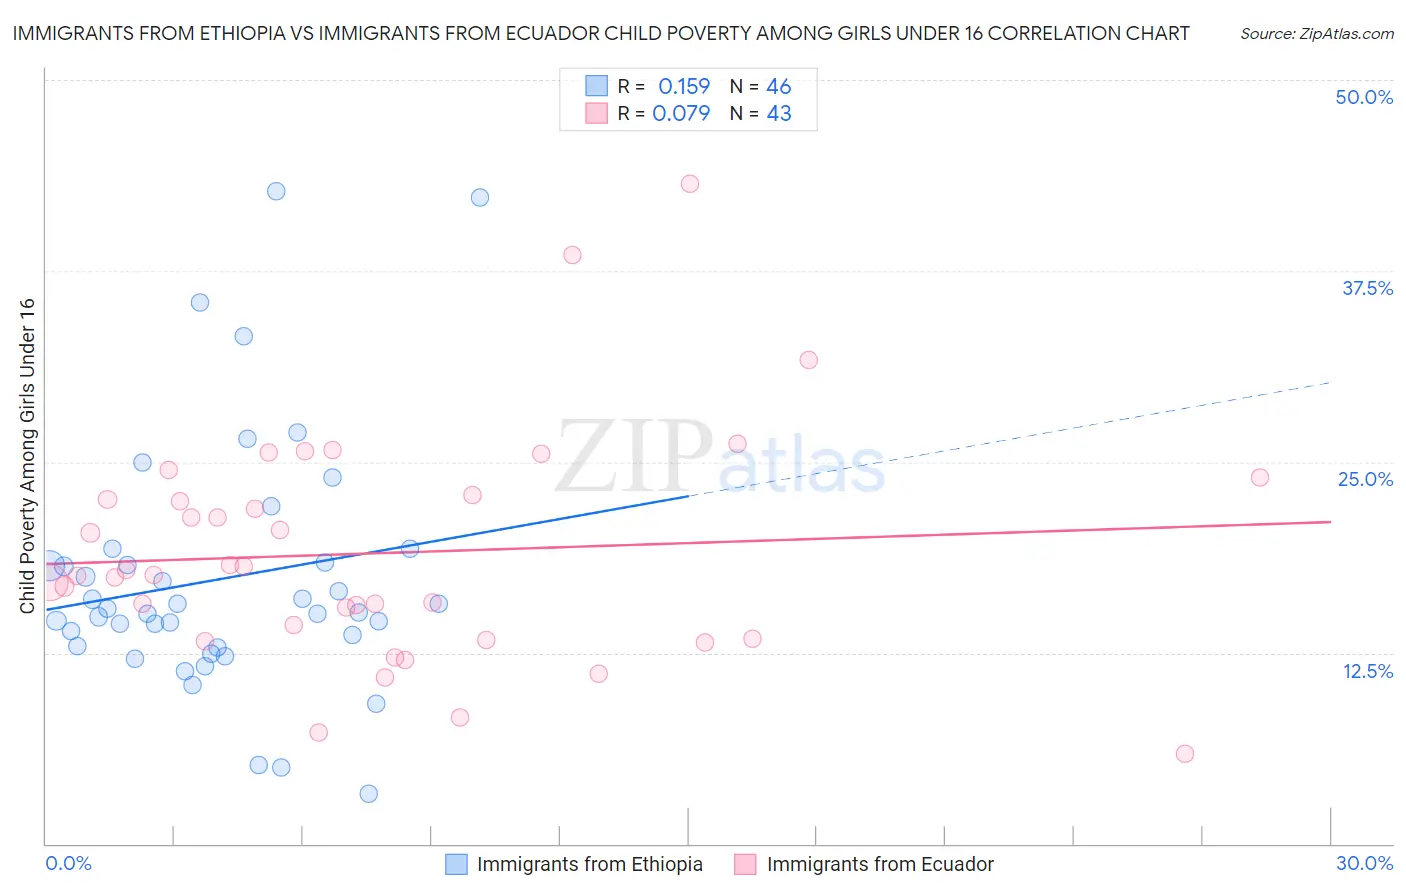 Immigrants from Ethiopia vs Immigrants from Ecuador Child Poverty Among Girls Under 16